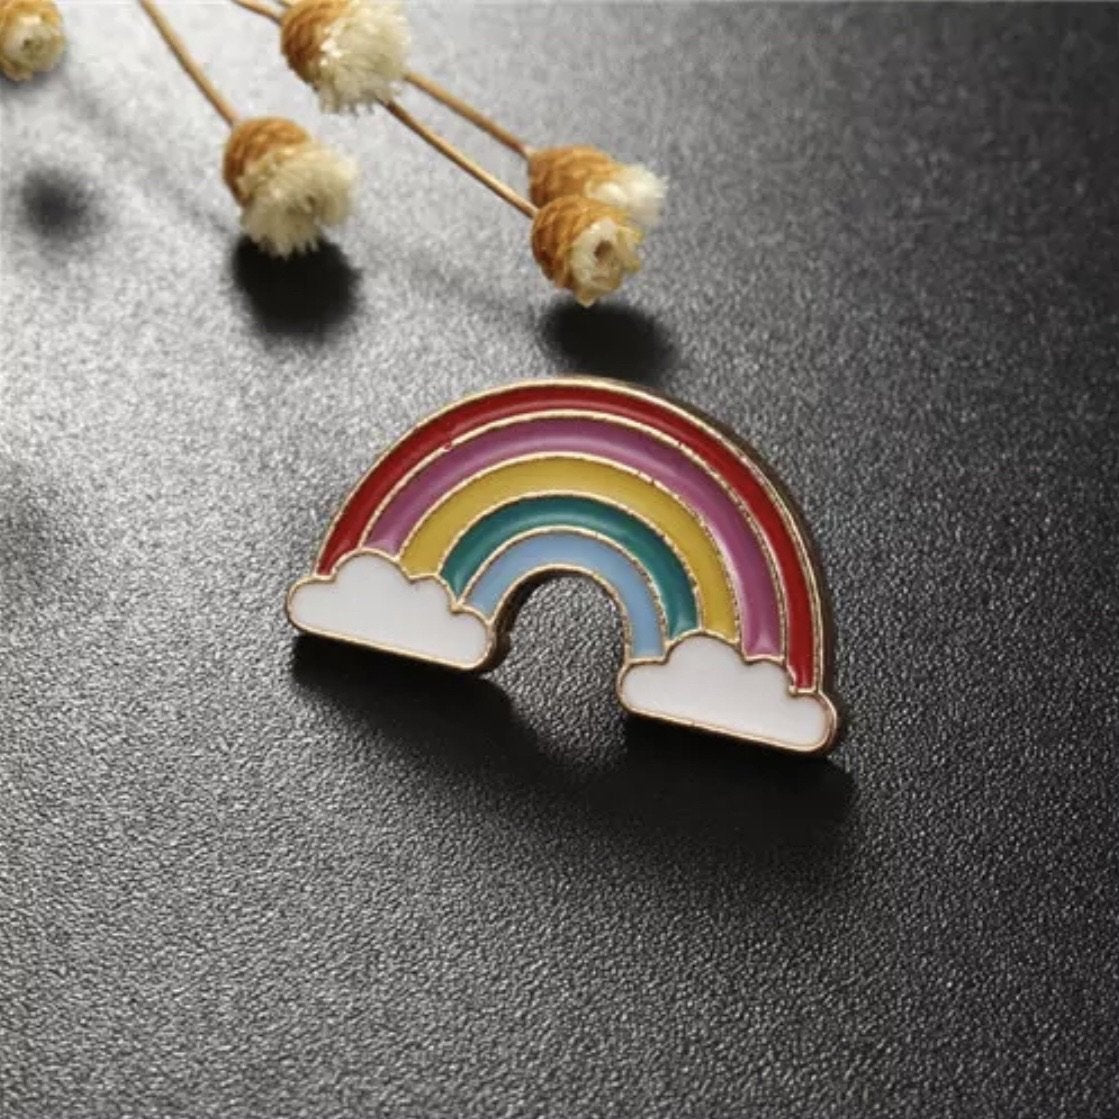 Rainbow Emaille Pin find Stylish Fashion for Little People- at Little Foxx Concept Store